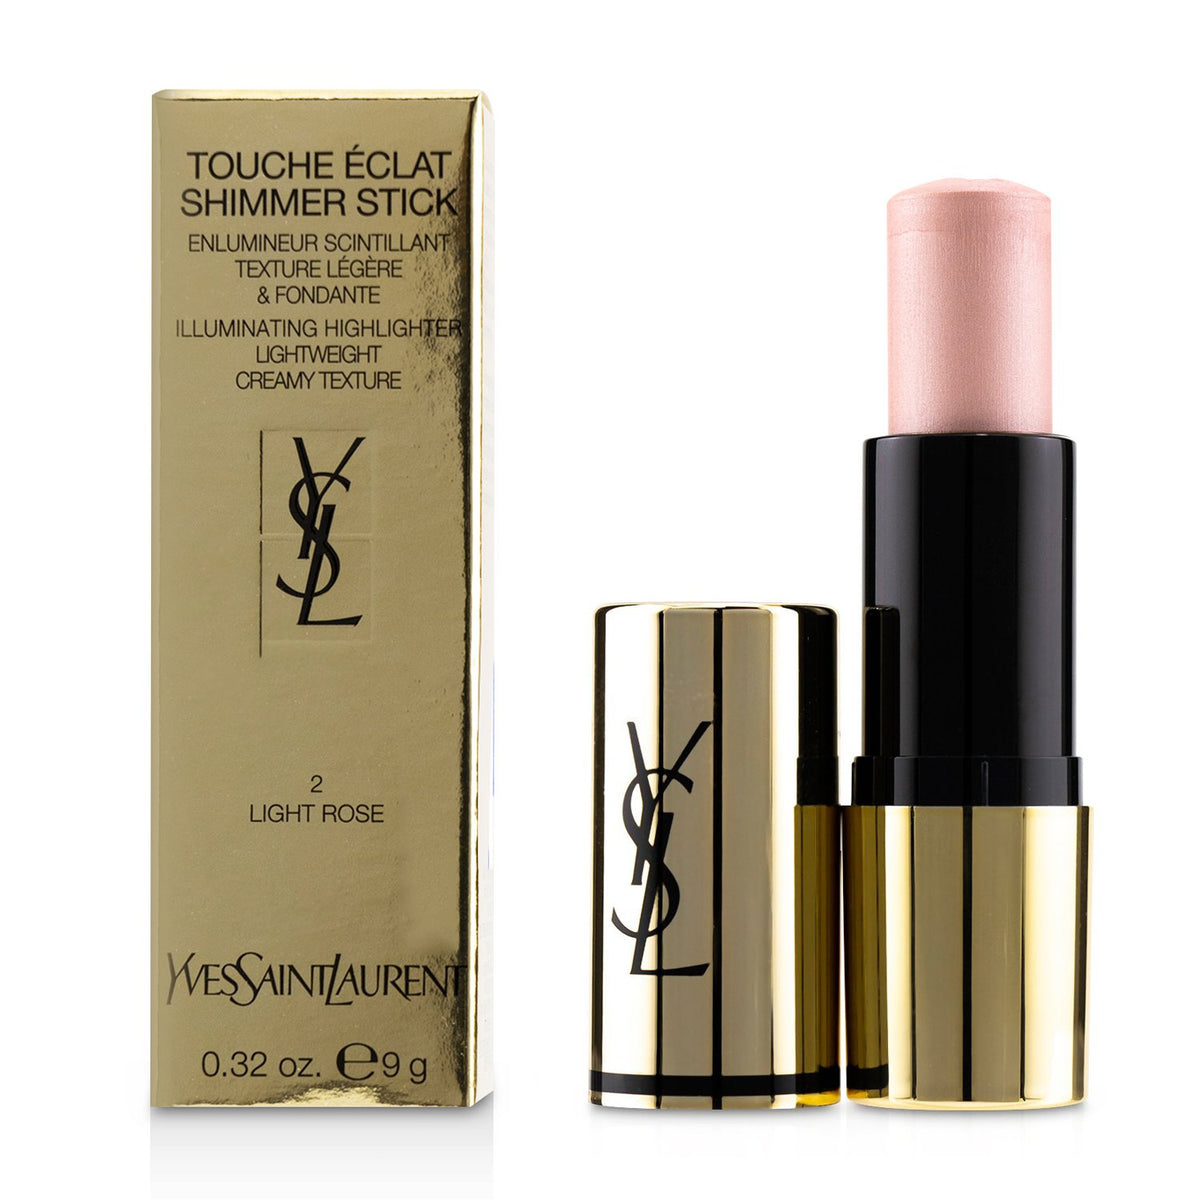 Touche Shimmer Stick Illuminating Highlighter for Sale | Yves Saint Laurent, Buy Now – Author